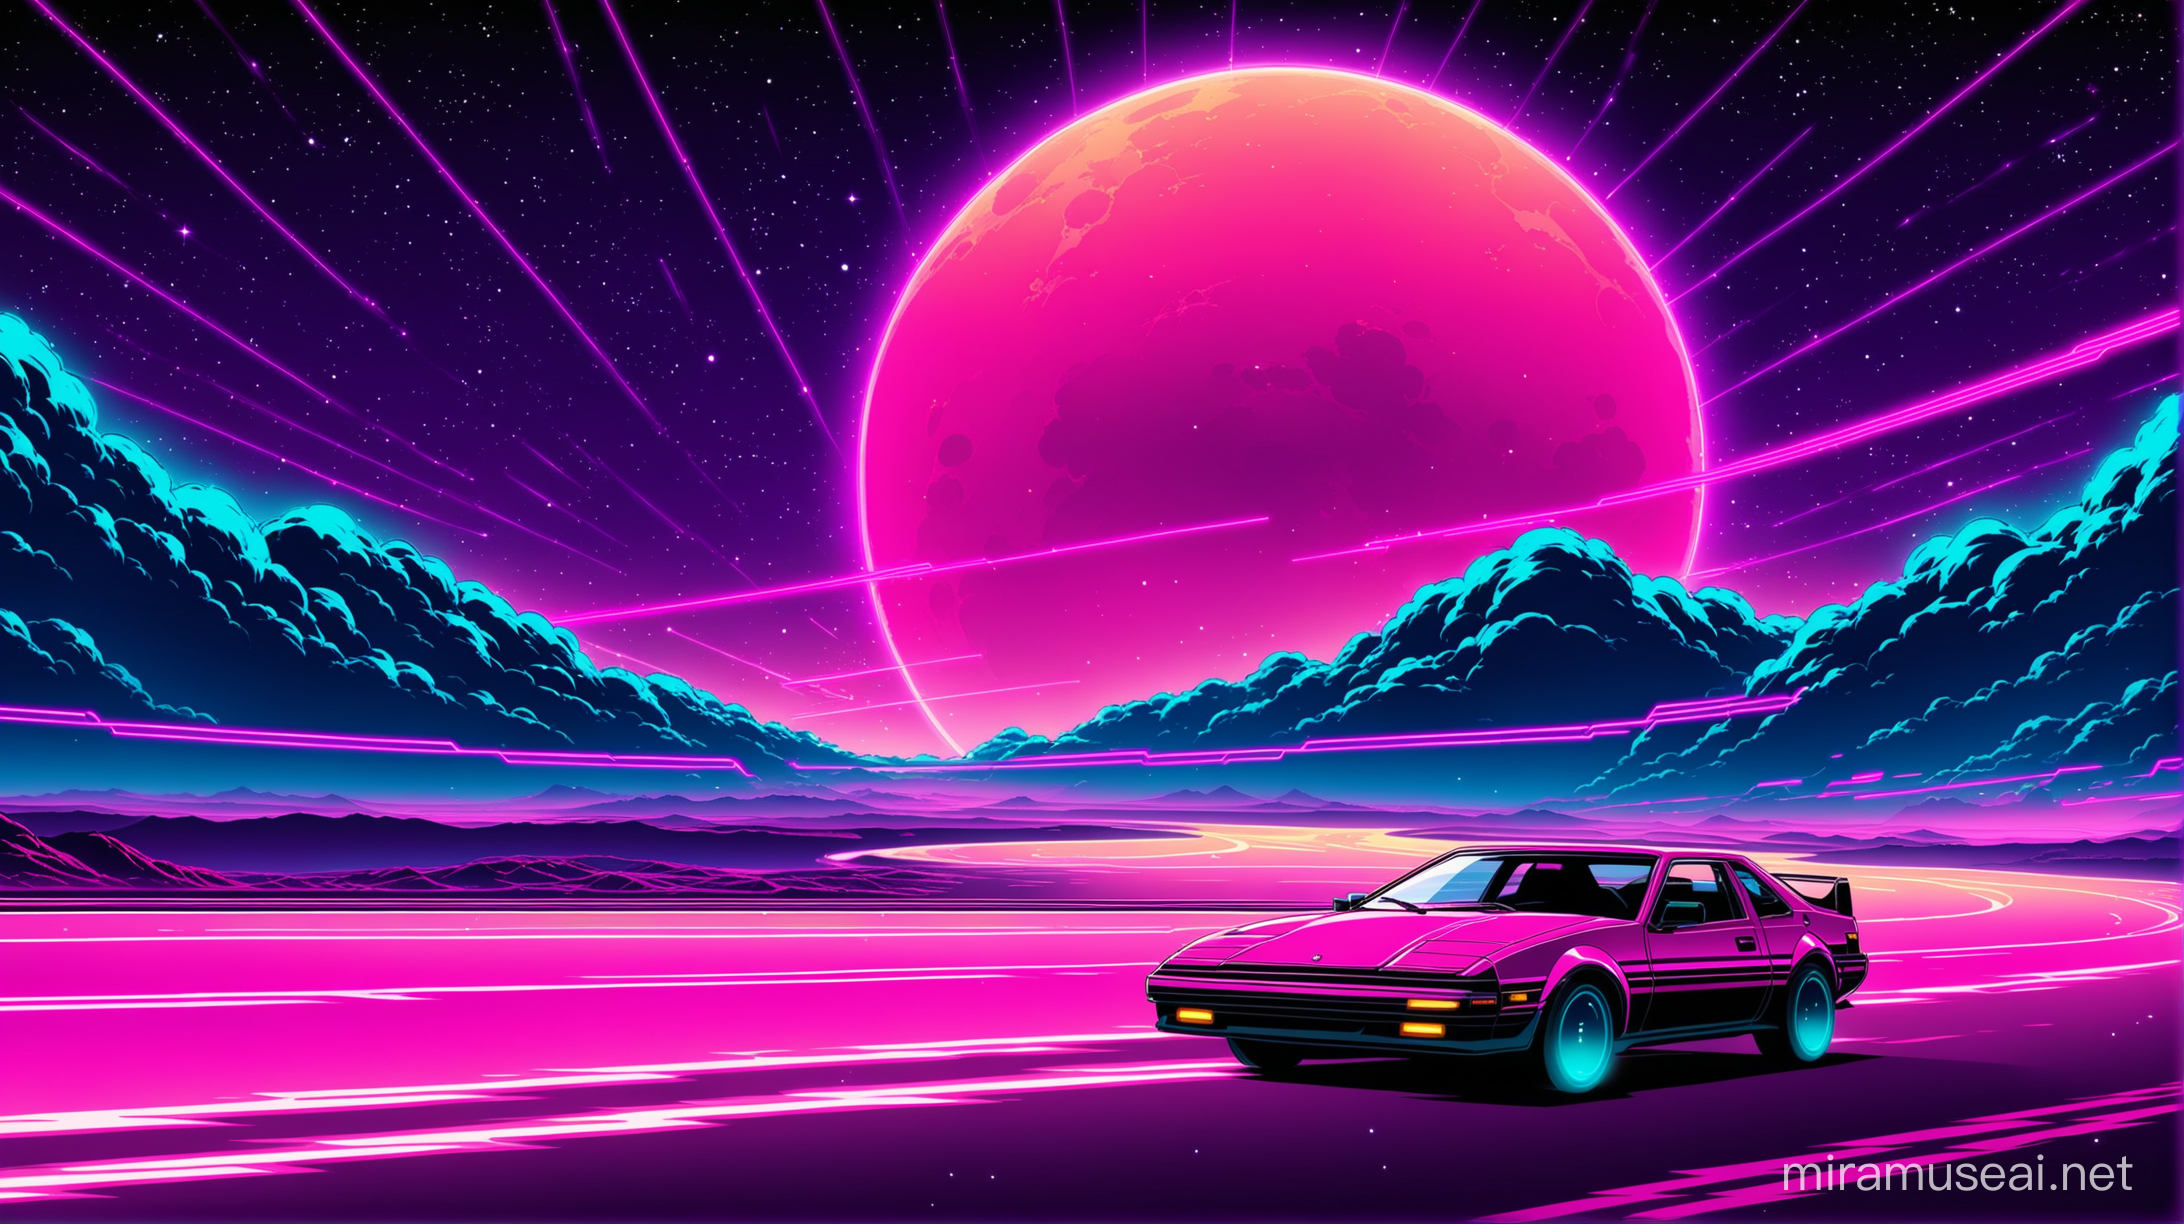 Nostalgic car space drive synthwave